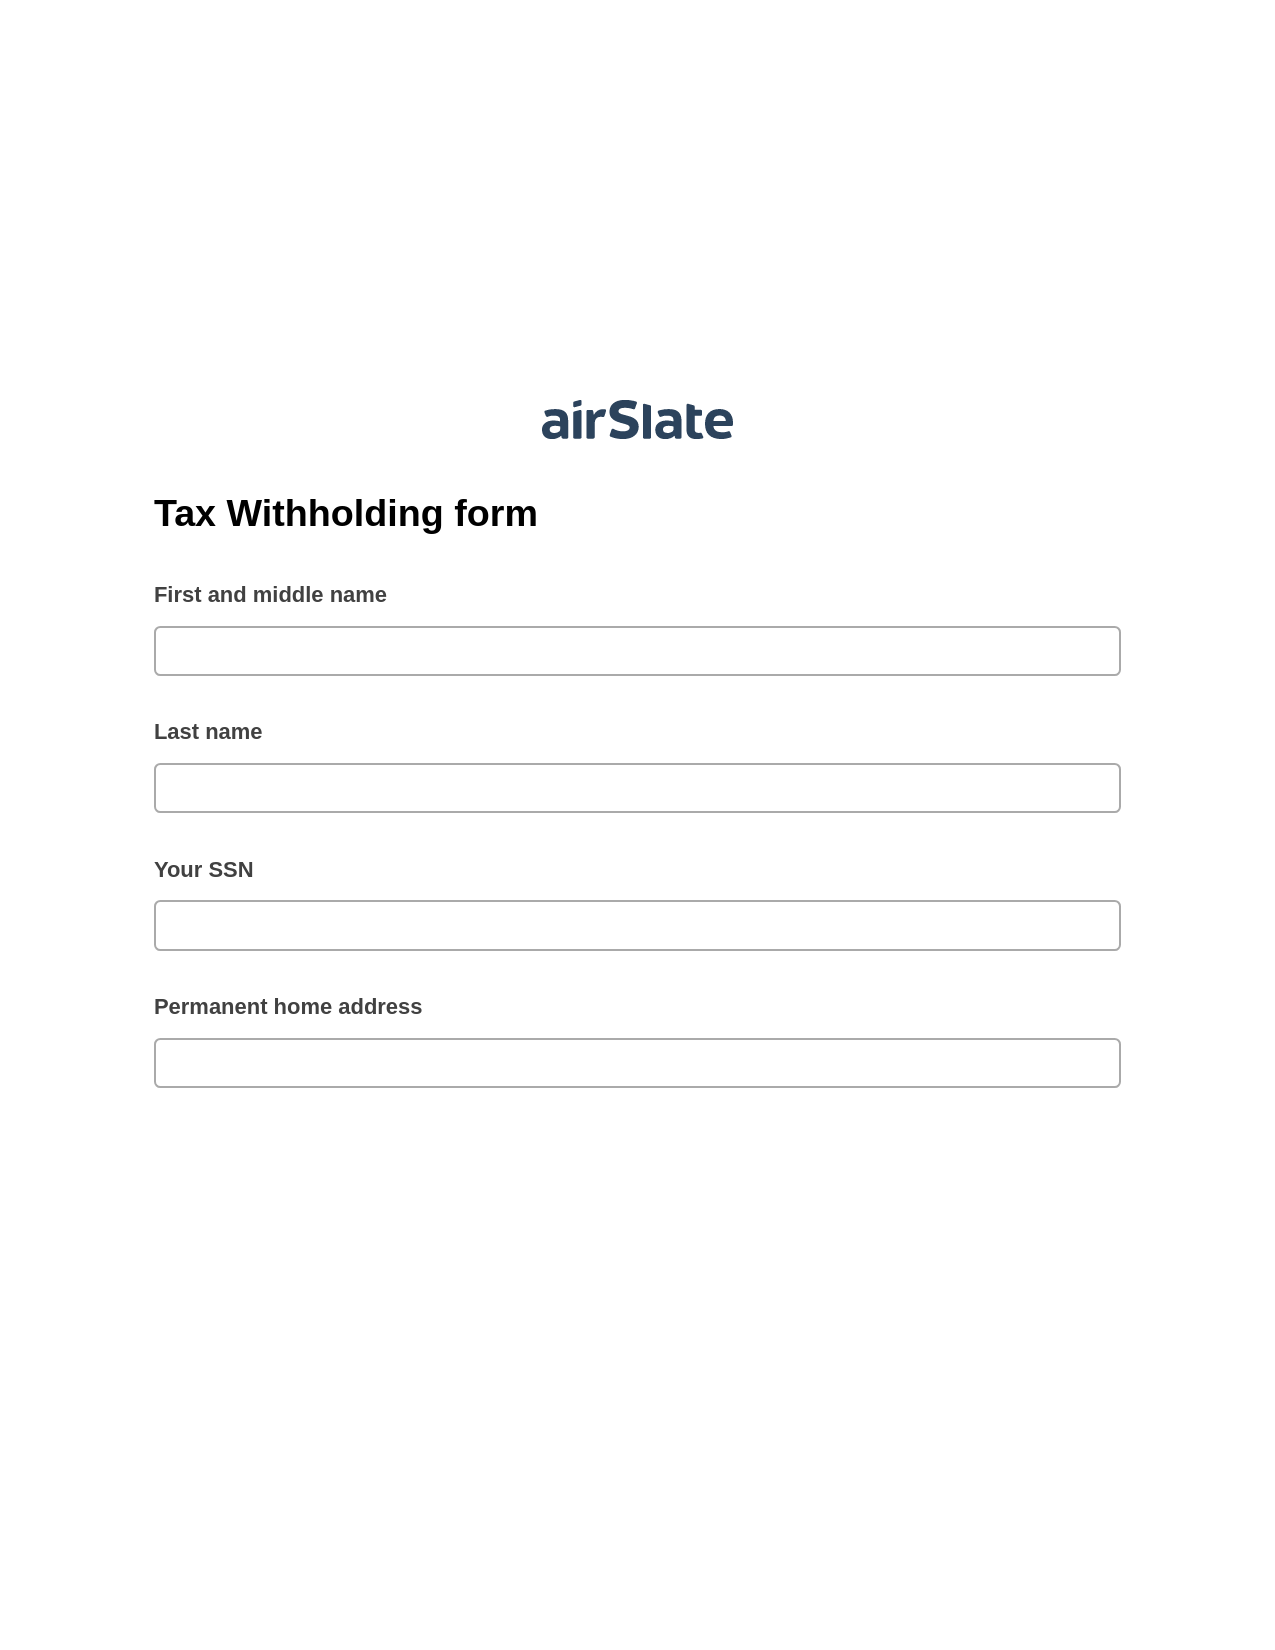 Multirole Tax Withholding form Pre-fill Slate from MS Dynamics 365 Records Bot, Export to MS Dynamics 365 Bot, Export to Excel 365 Bot